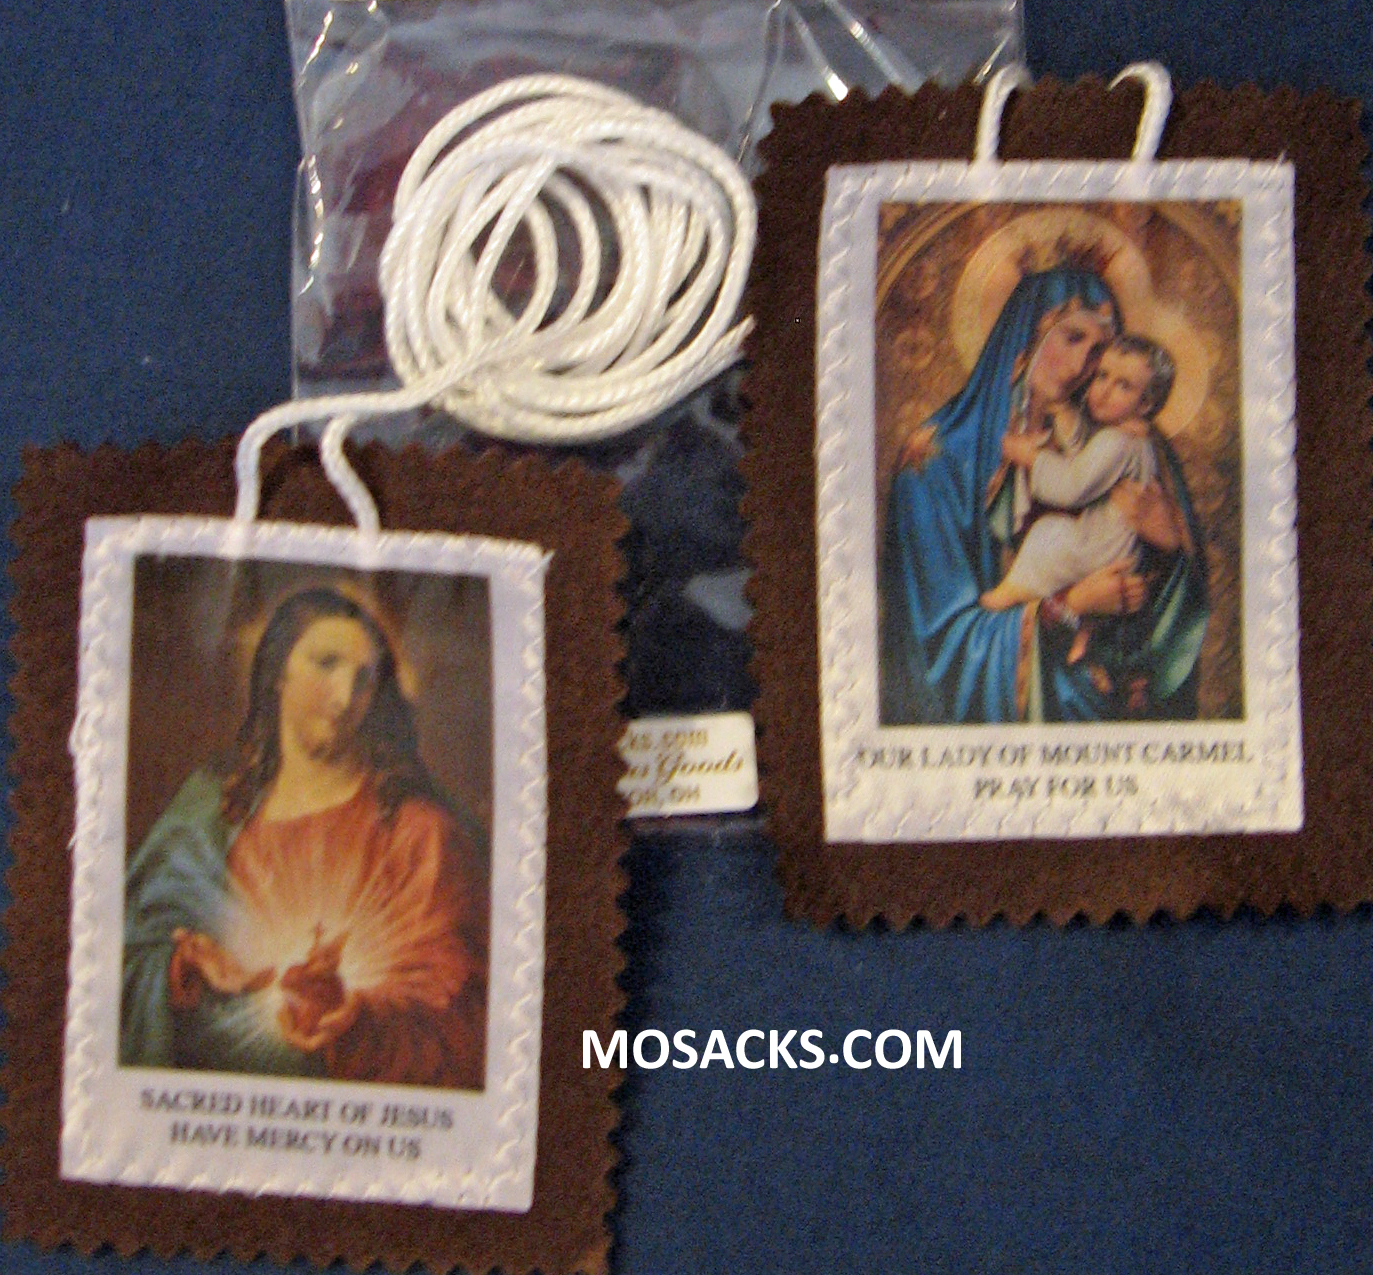 Large Brown Wool Scapular With Cloth ImageWhite Cord 12-1516 measures 2-1/2" x 3-1/2"